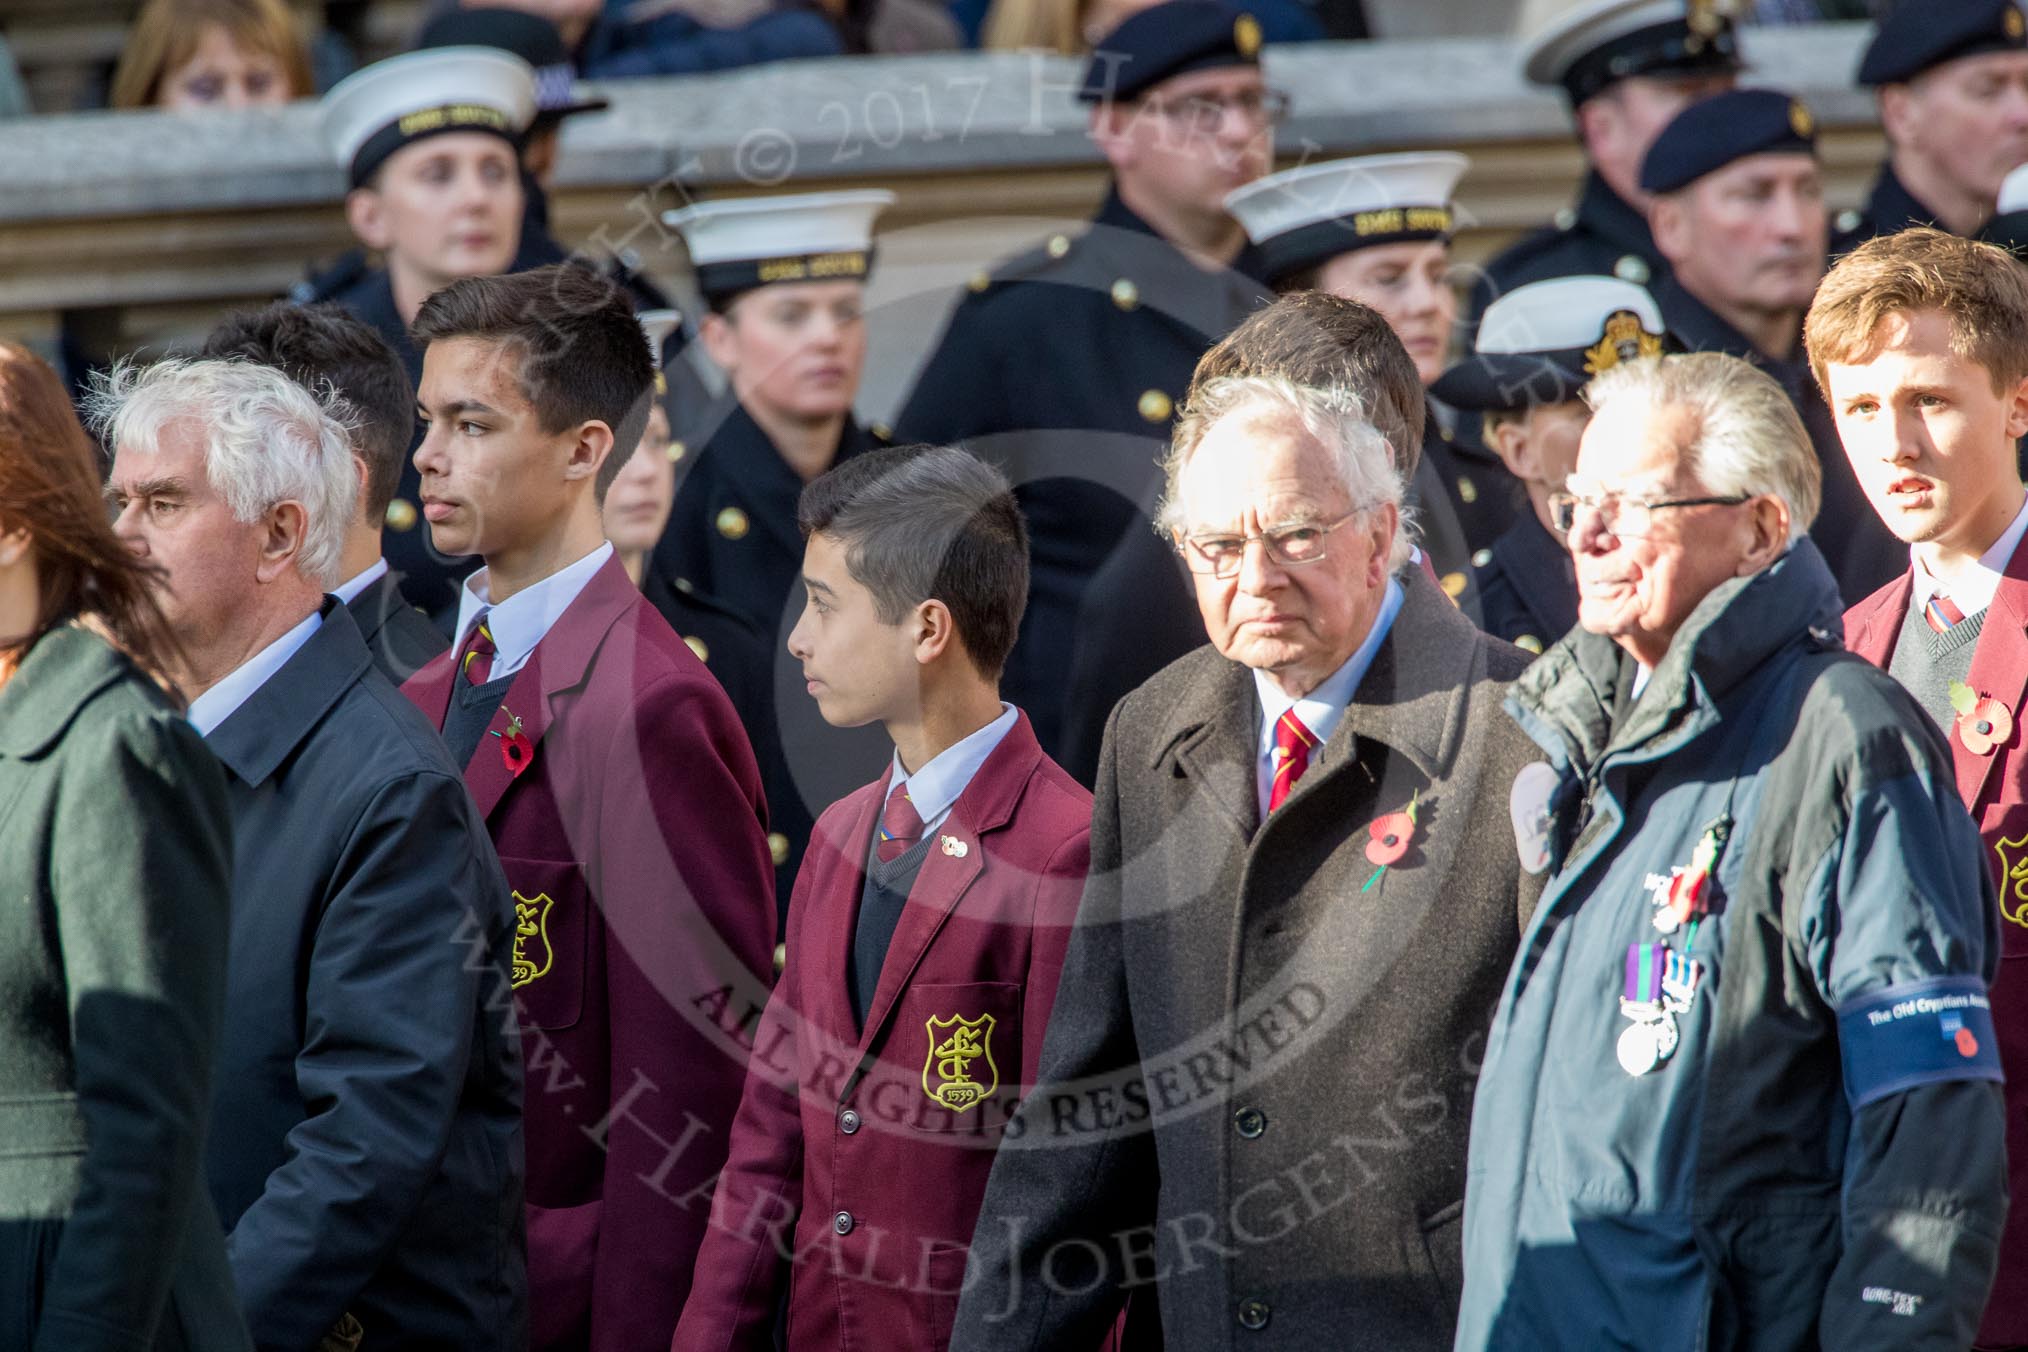 The Old Cryptians Club (Group M22, 18 members) during the Royal British Legion March Past on Remembrance Sunday at the Cenotaph, Whitehall, Westminster, London, 11 November 2018, 12:27.